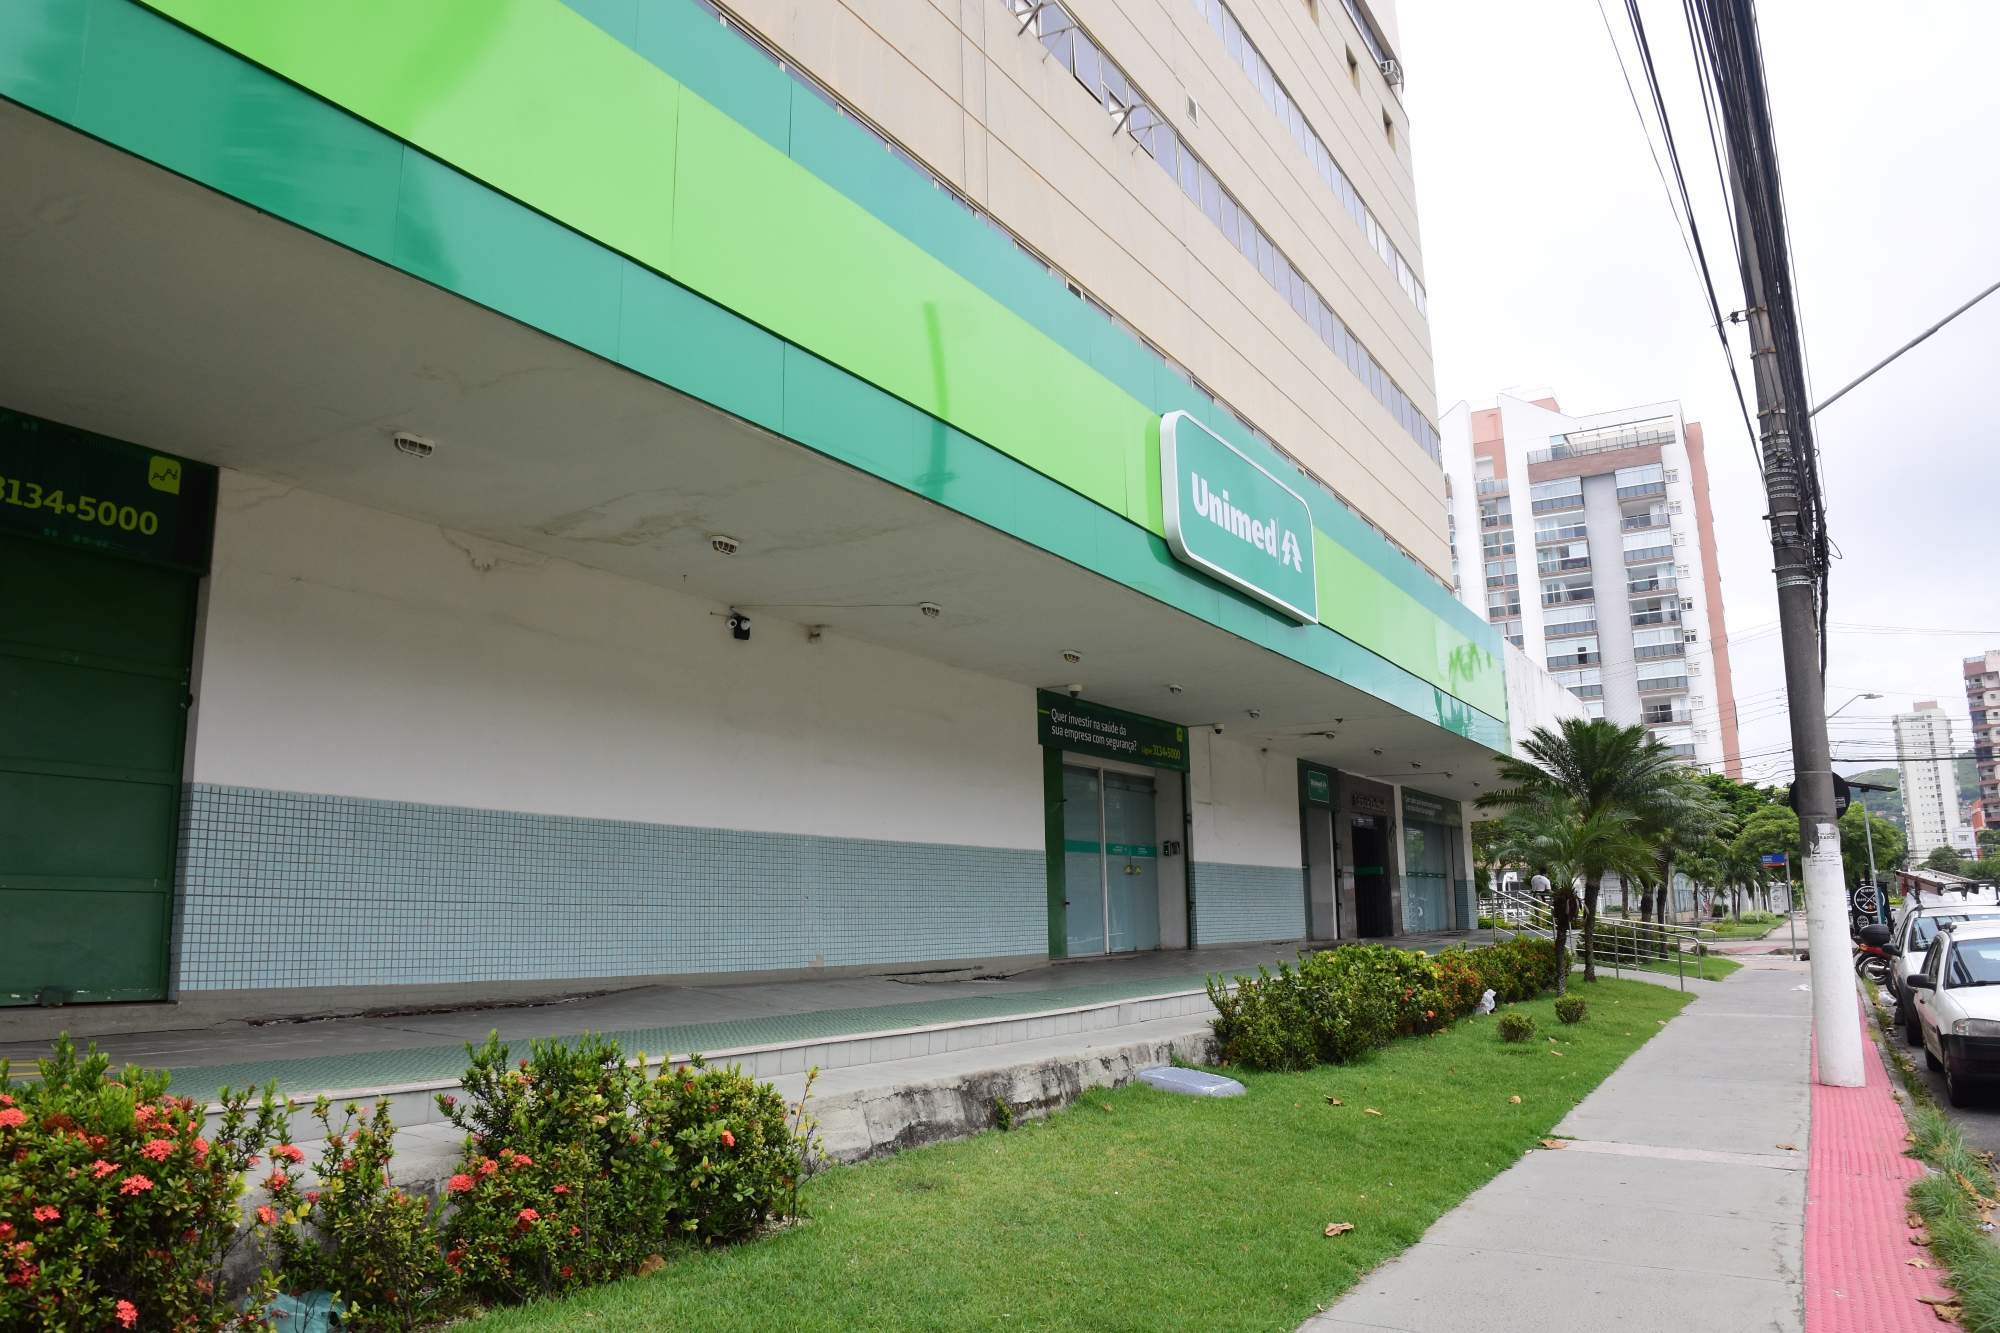 Unimed Vitória excludes services from some hospitals;  You know which ones